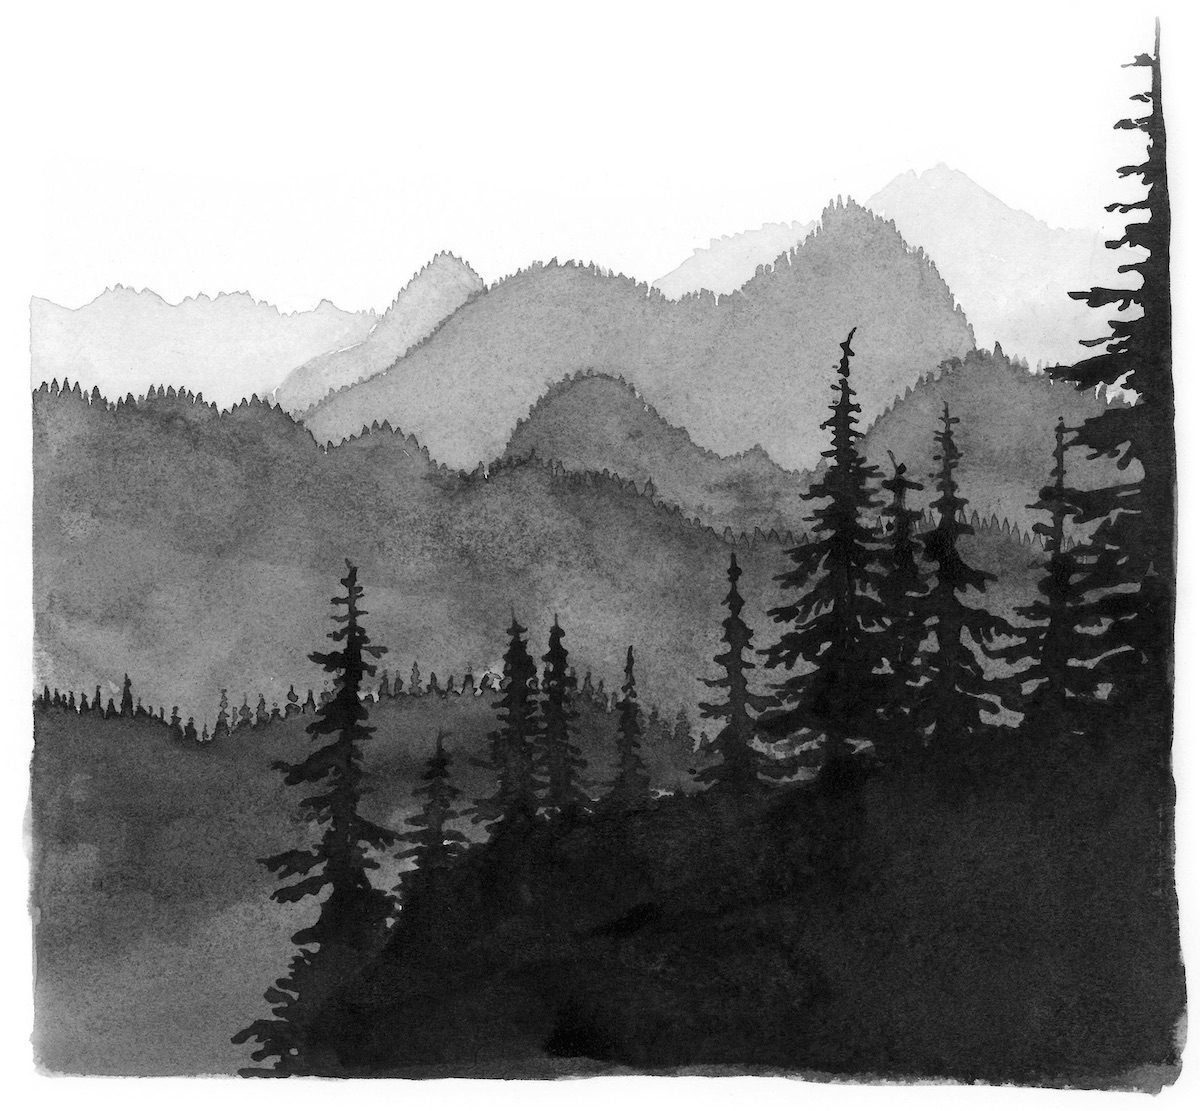 Mountain Range. Justin Gibbens's illustrations appear throughout the book. [Image] Courtesy of Mountaineers Books